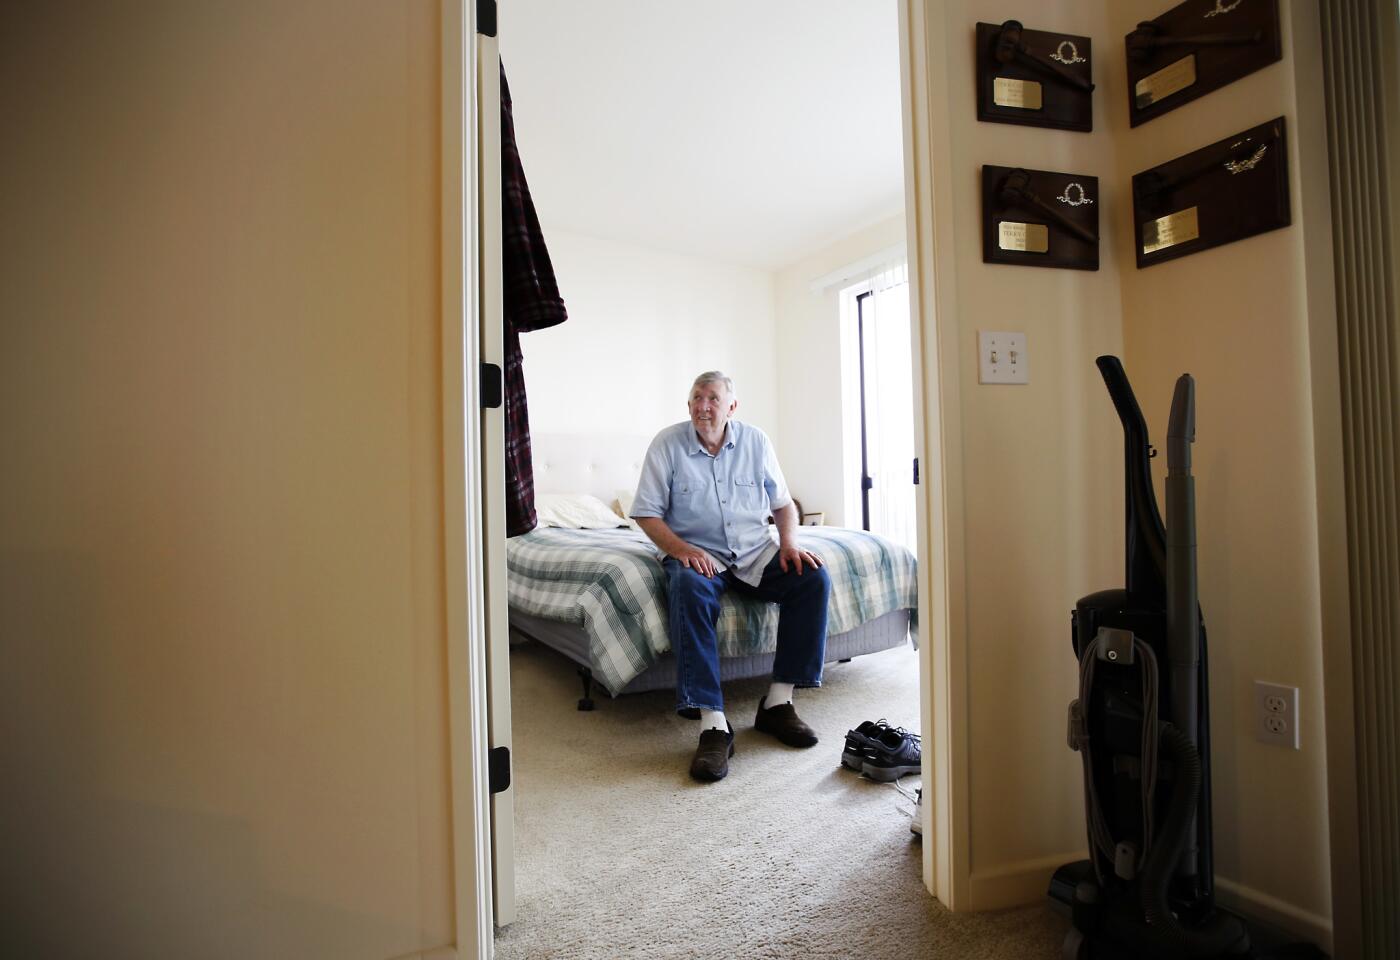 Resident Terry Conner, 73, sits on his bed, putting on his shoes in his apartment at The Woods at Playa.